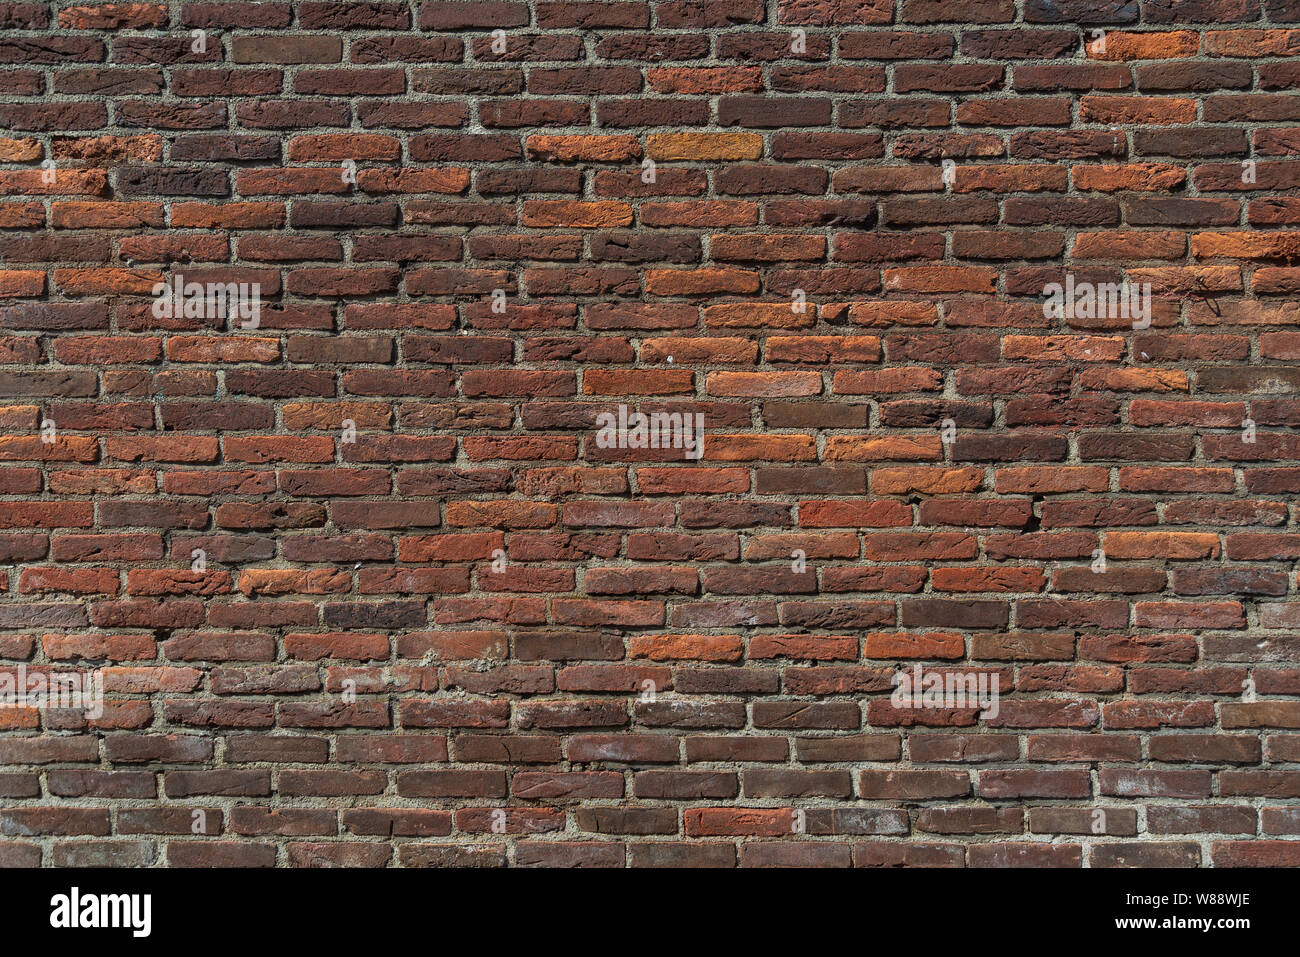 Real vintage Bumpy, rough and old brick texture with imperfect, dilapidate, impair and defective running bond pattern. Stock Photo